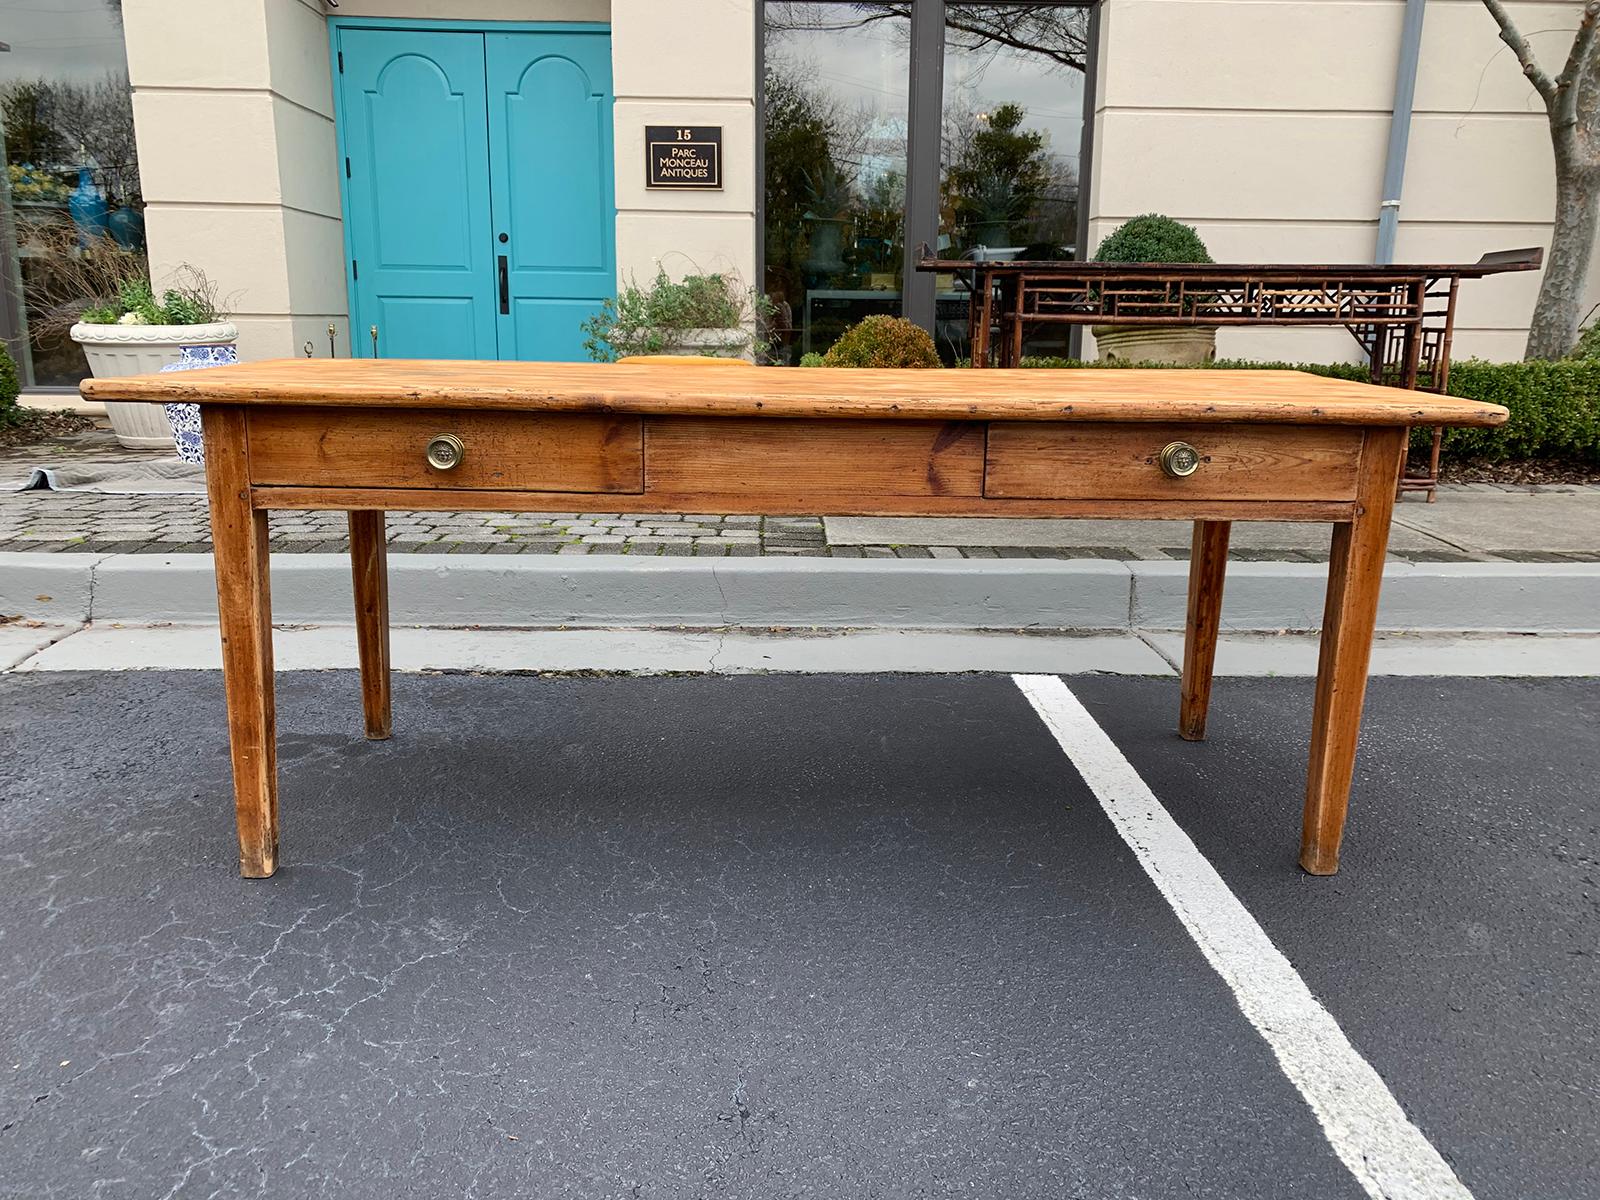 19th century French pine farm table with two drawers
Charming color
Lion heads on drawer pulls
Measures: 78.25